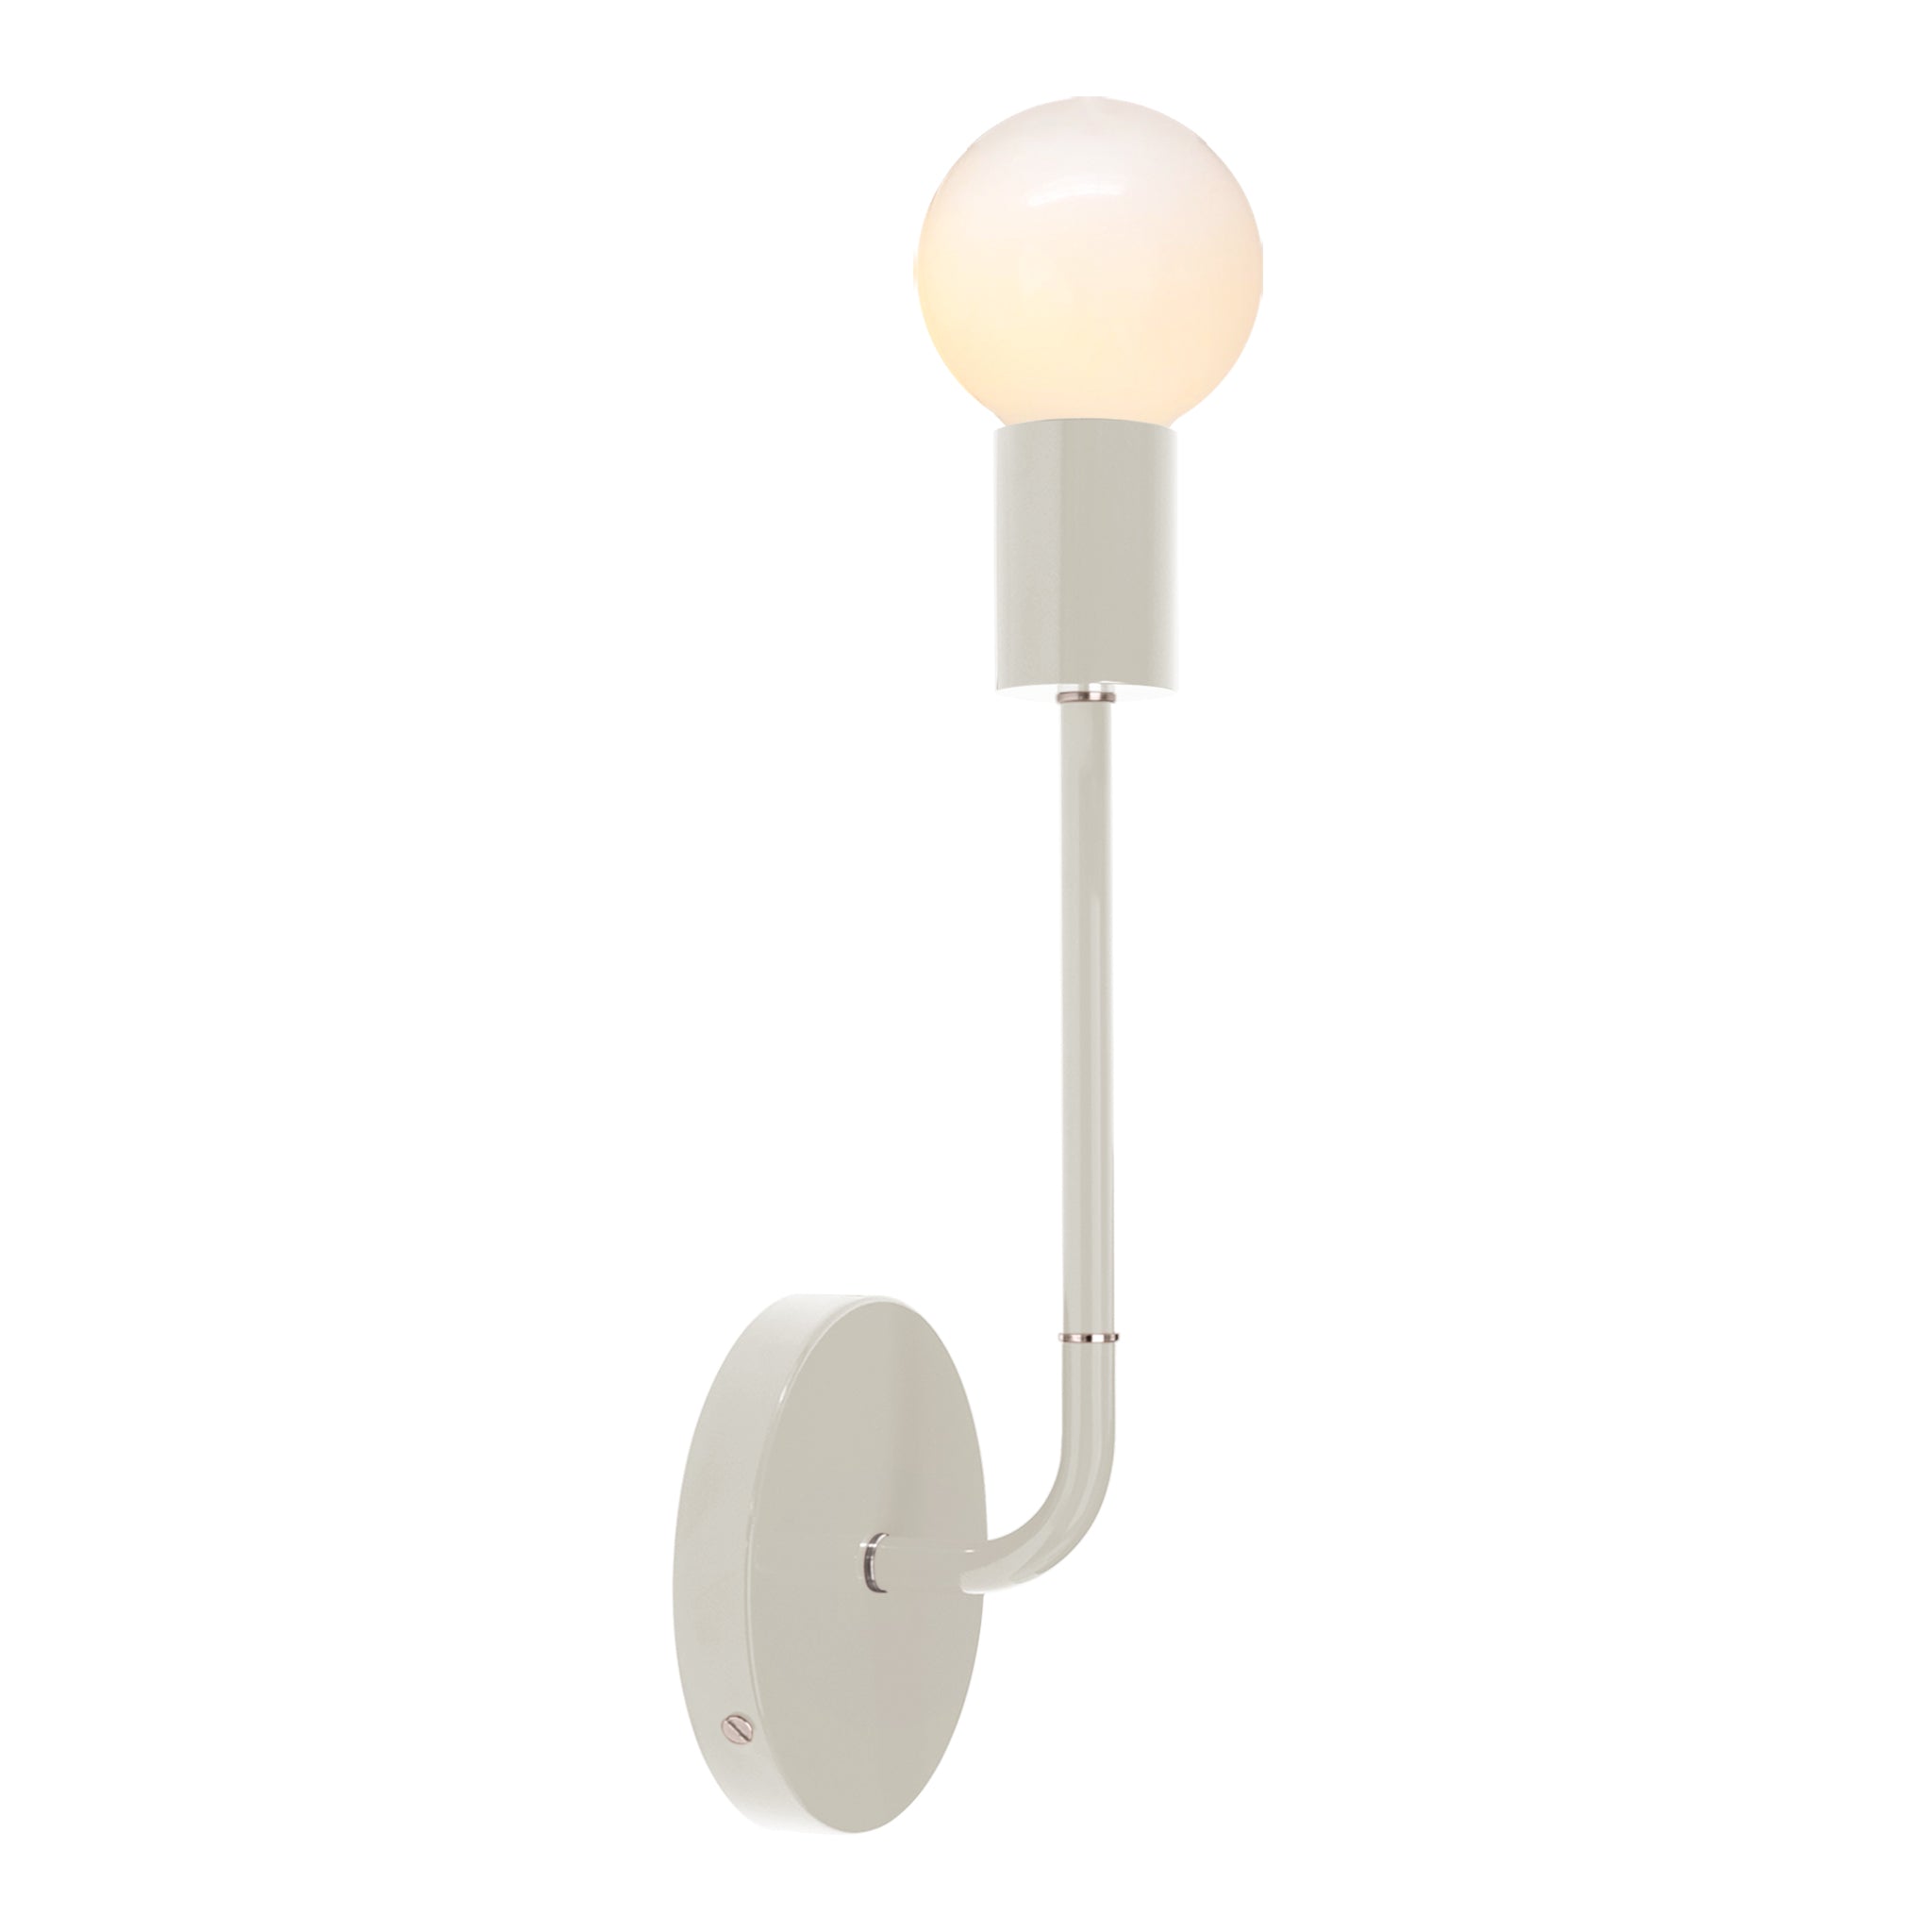 Nickel and bone color Tall Snug sconce Dutton Brown lighting